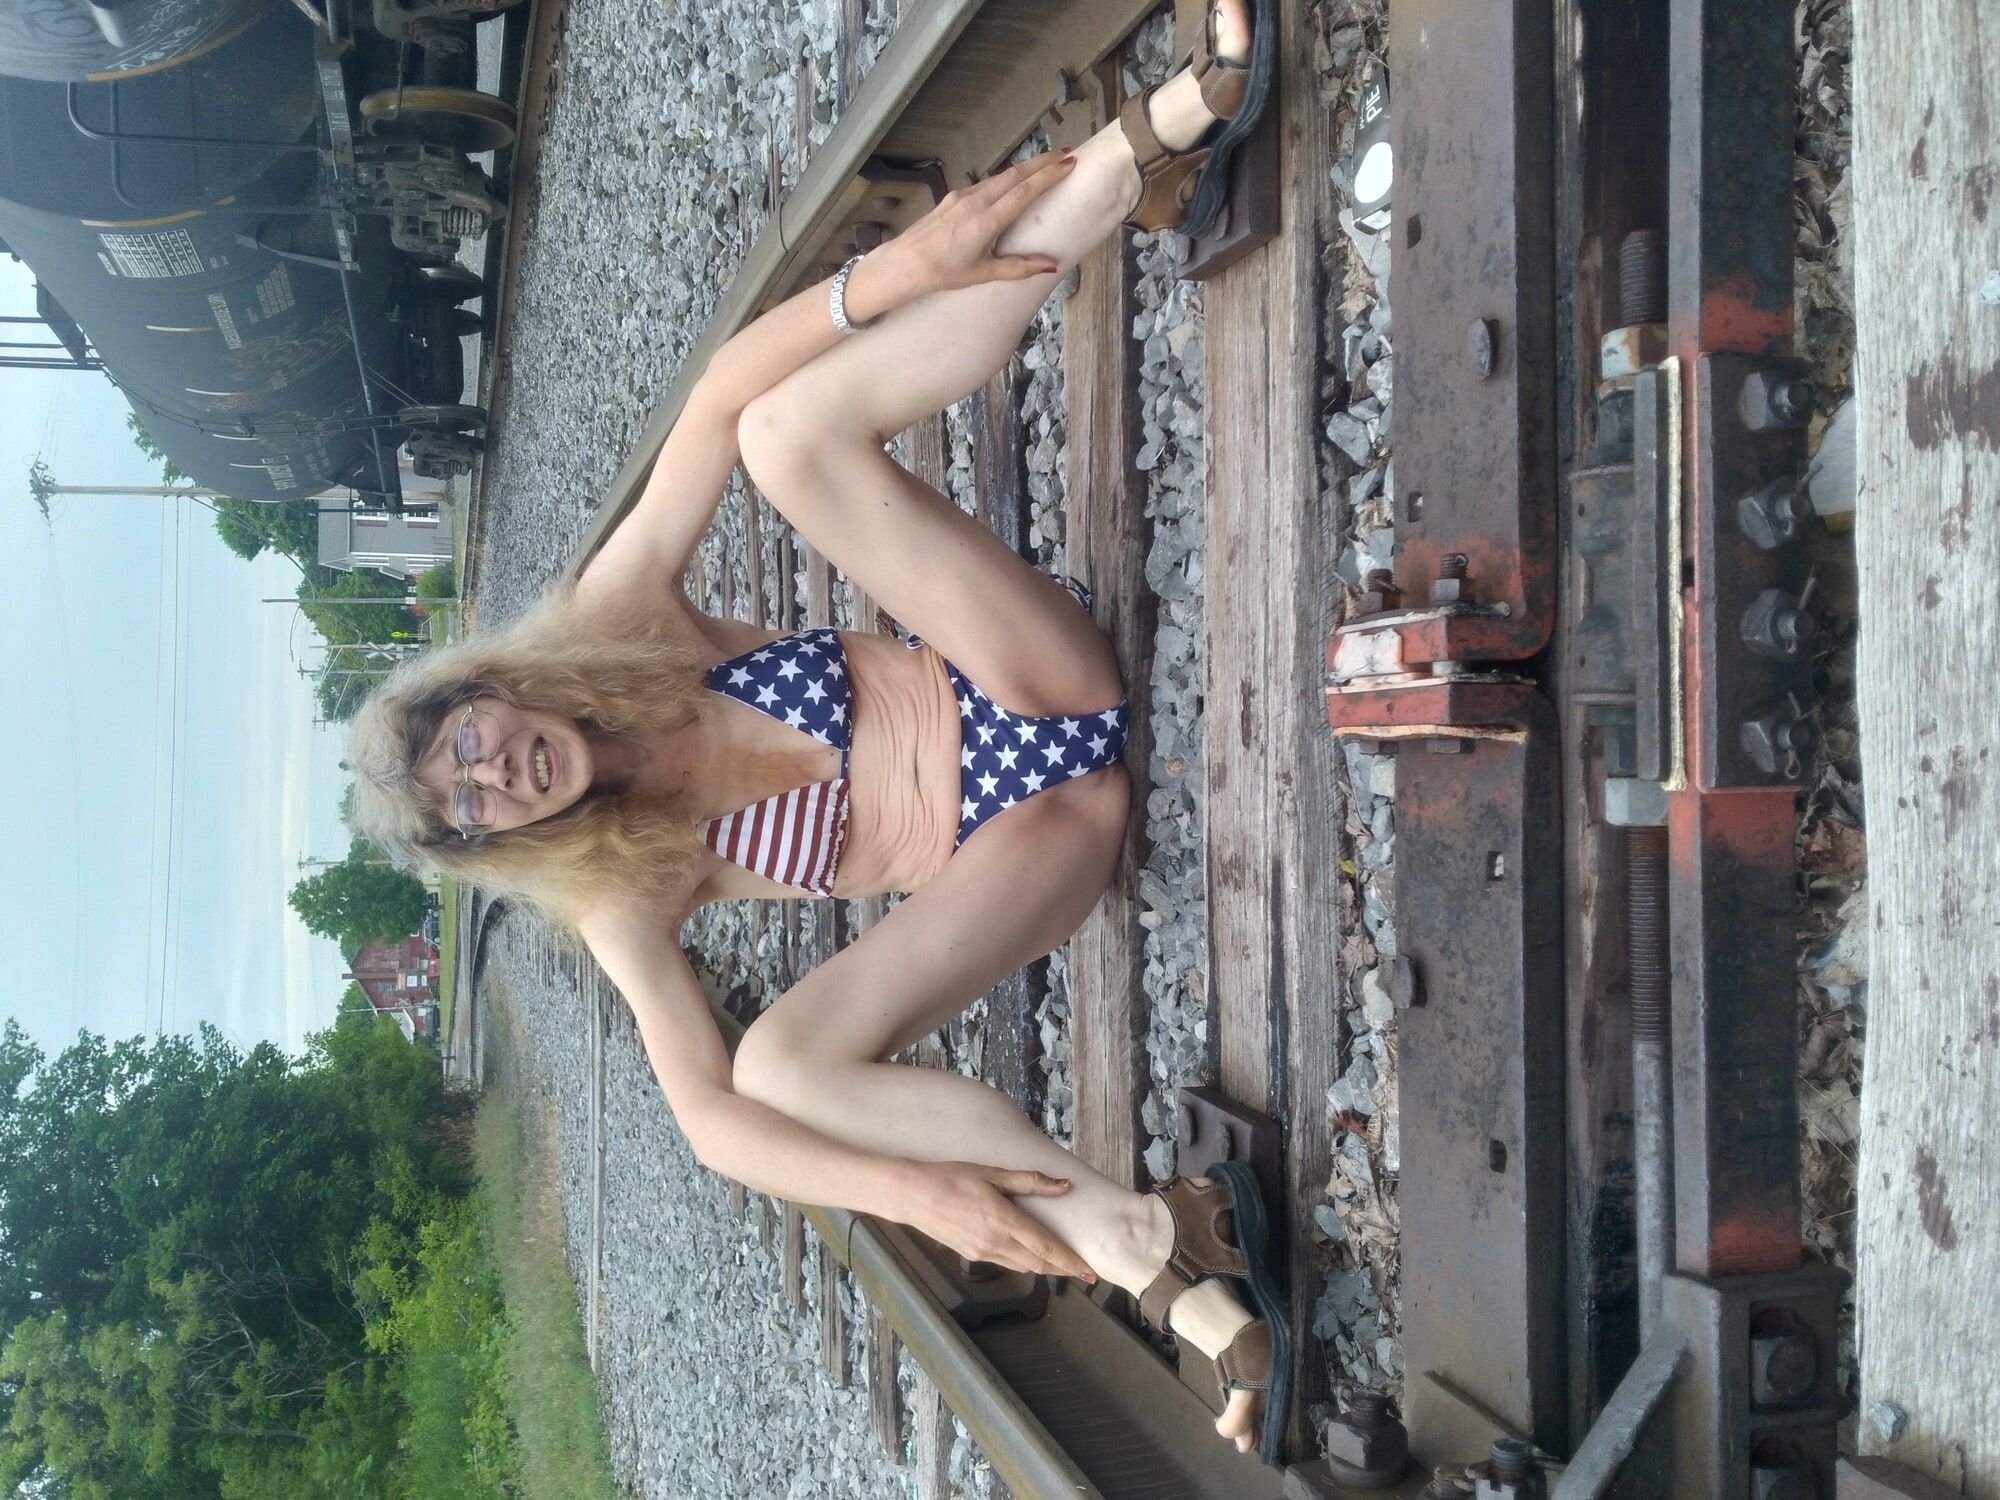 American Train. July 4th release. My best photo set to date. #30